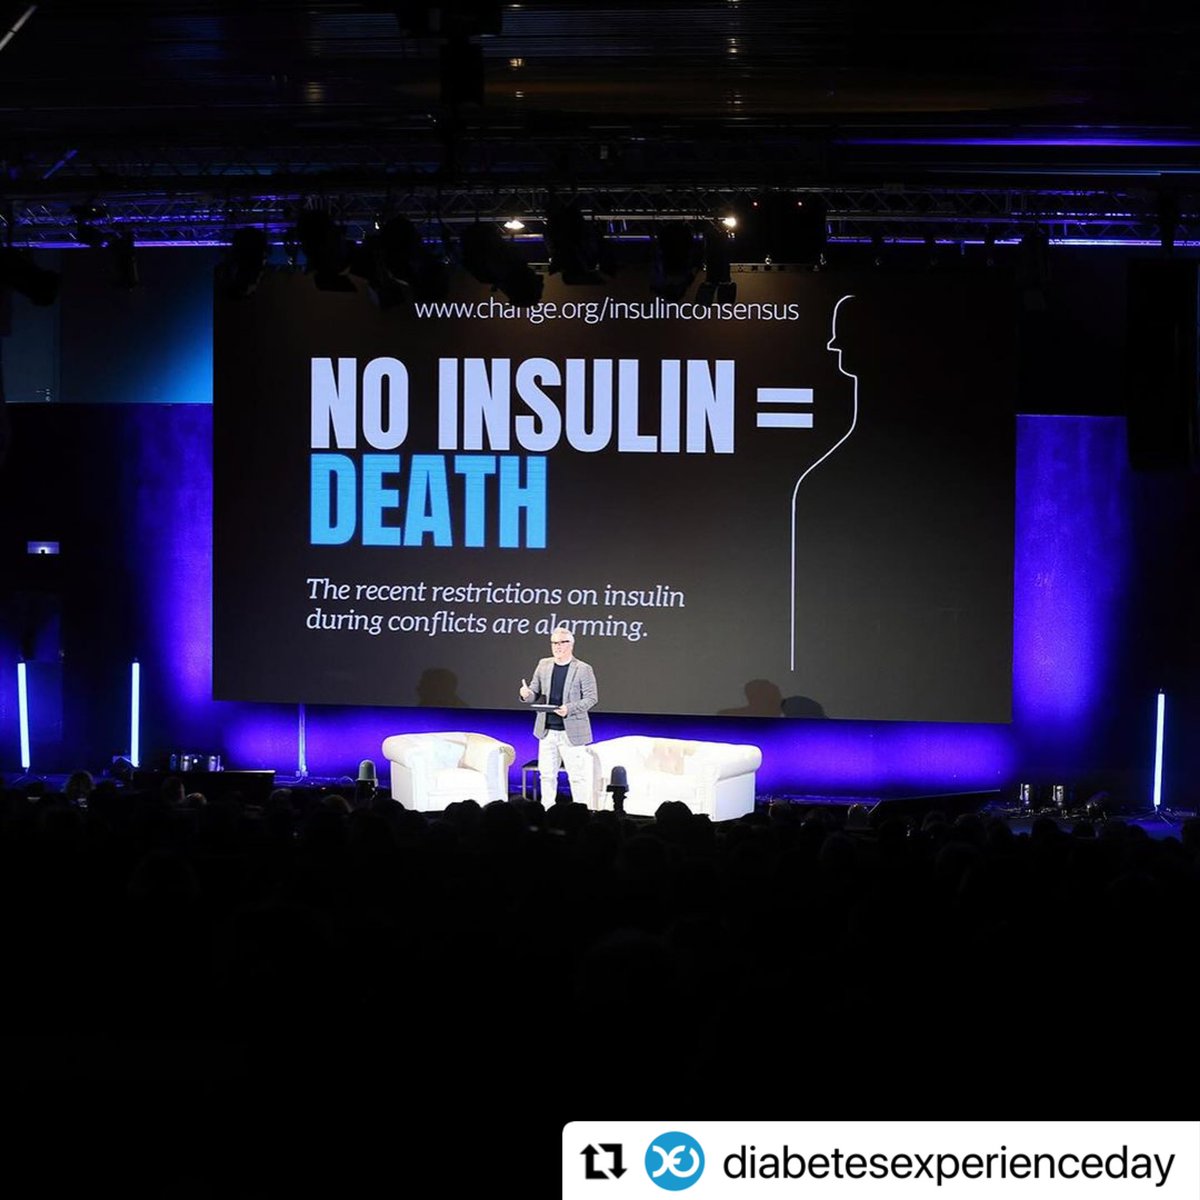 #Insulinconsensus Share and sign ! Insulin is not optional and we don’t choose diabetes or armed conflicts